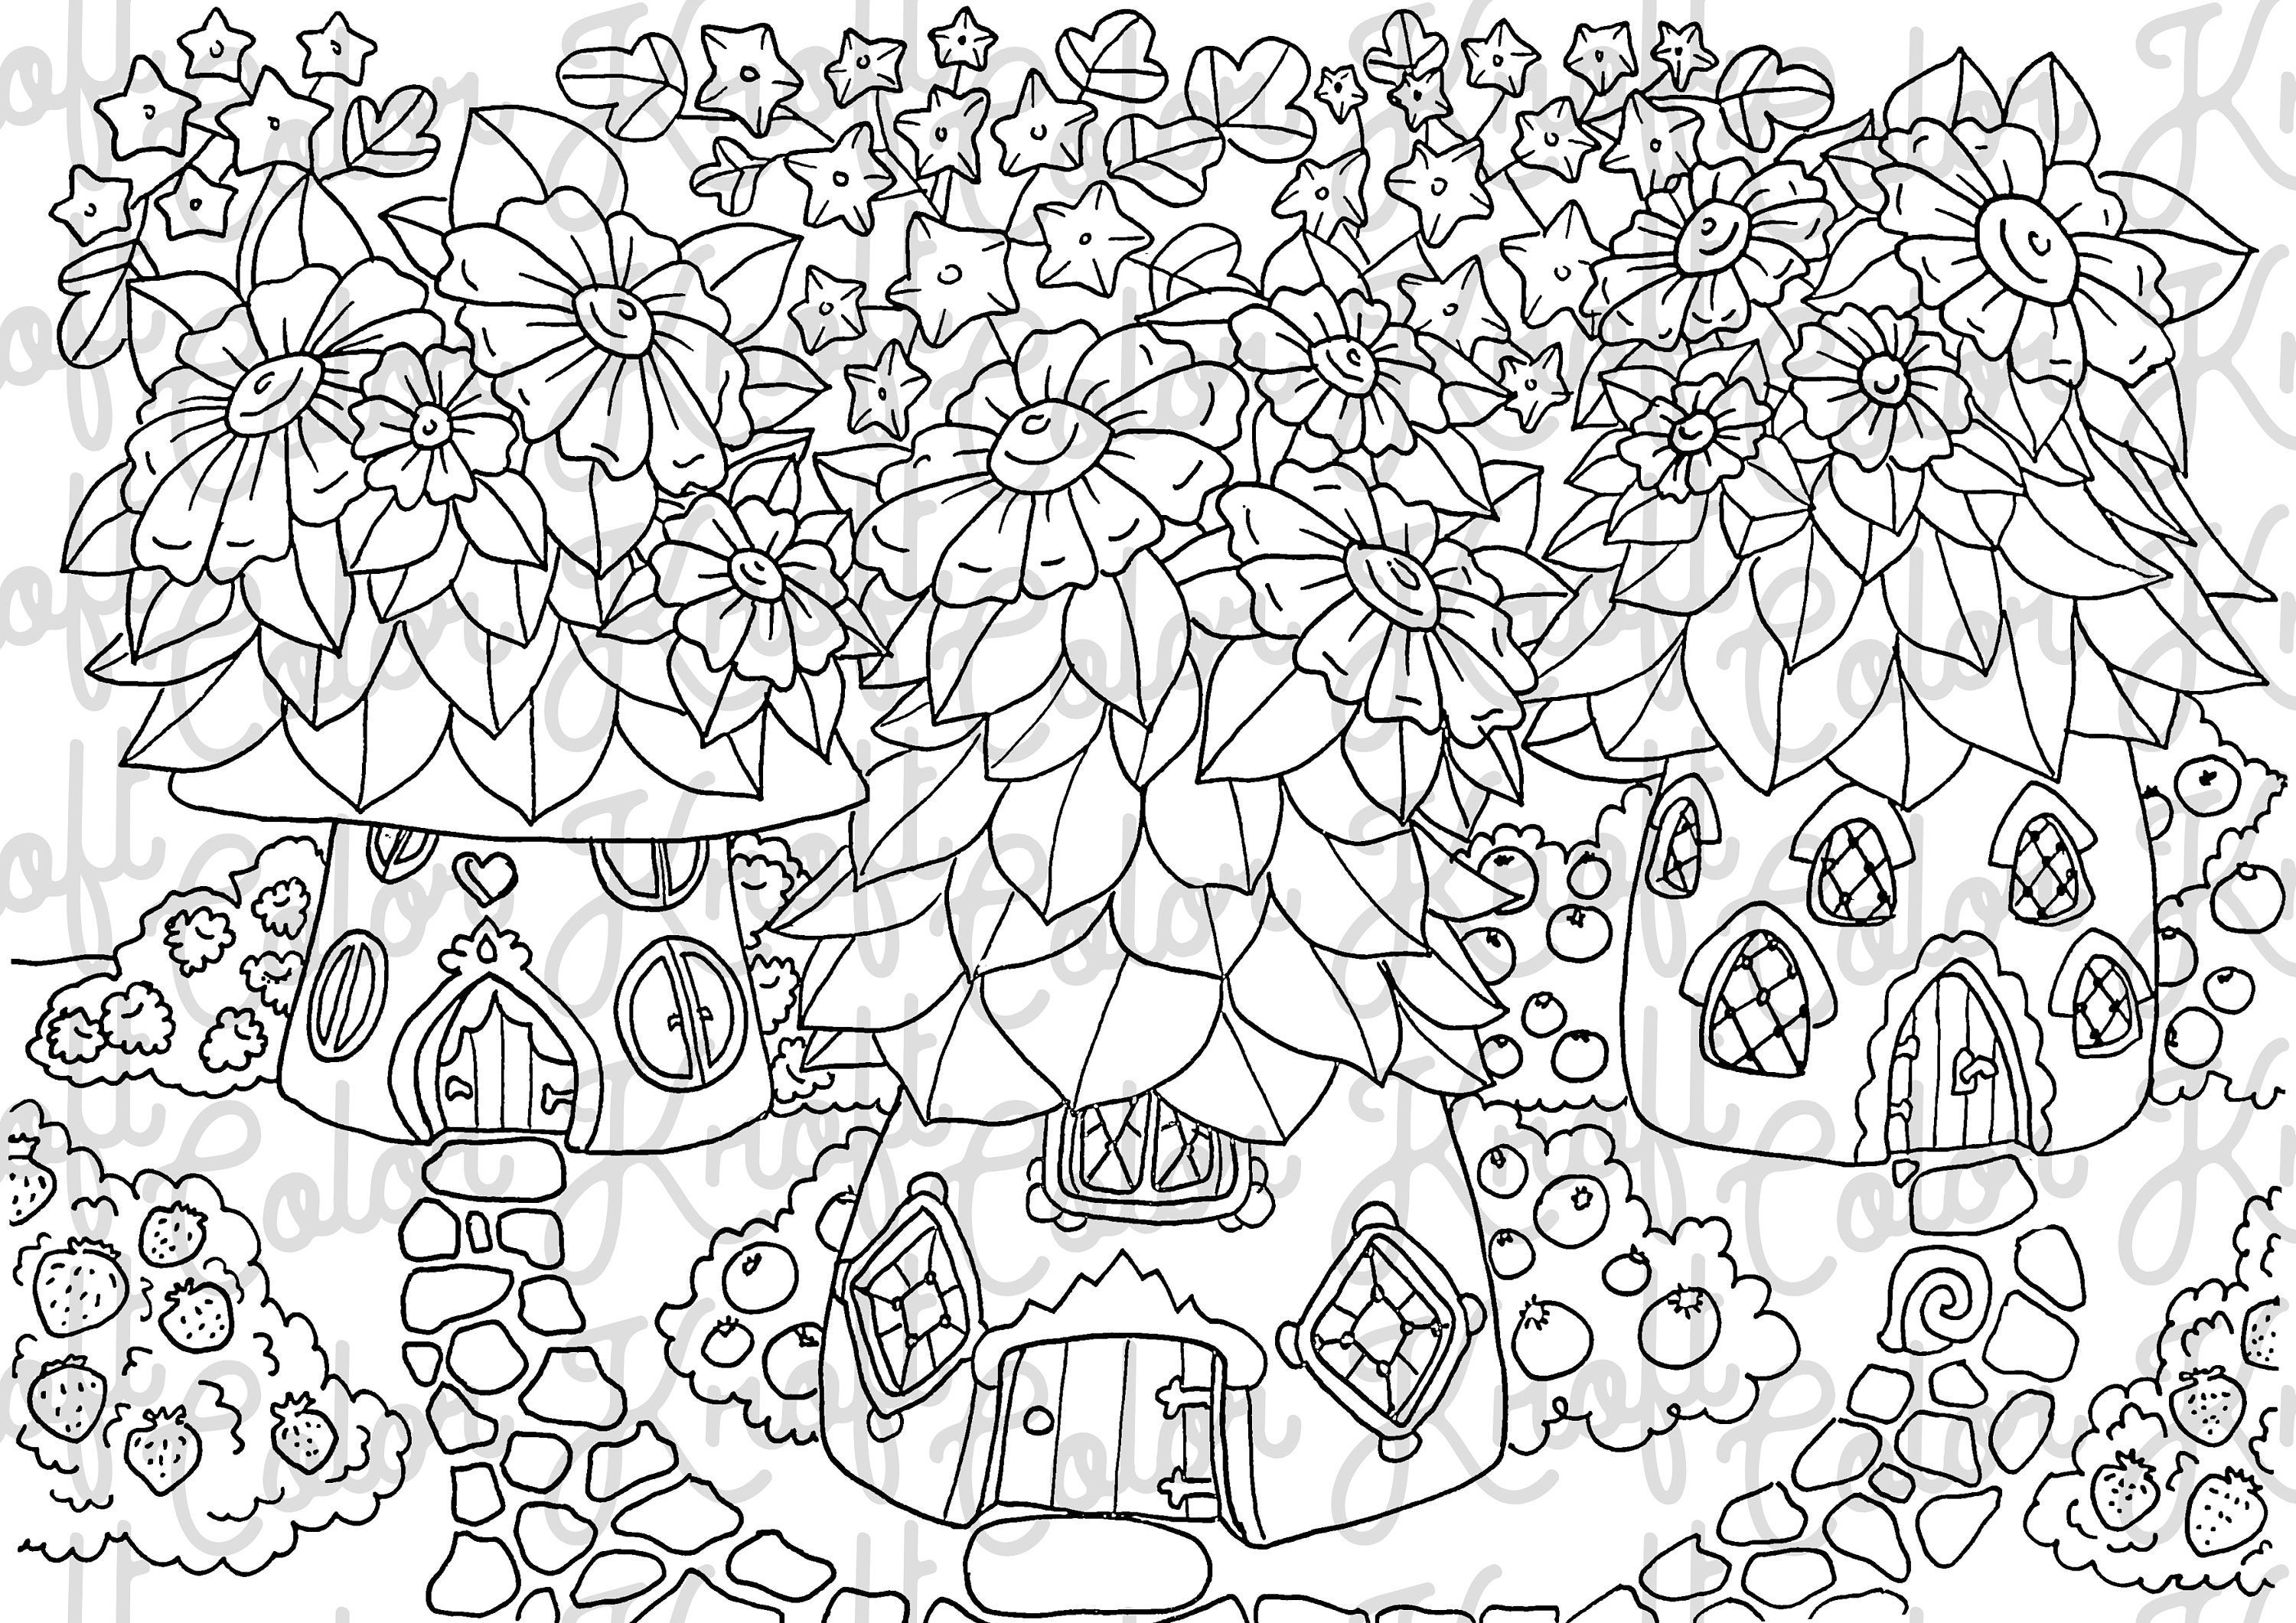 Fairy Garden Coloring Page // House of Fairies // Digital | Etsy